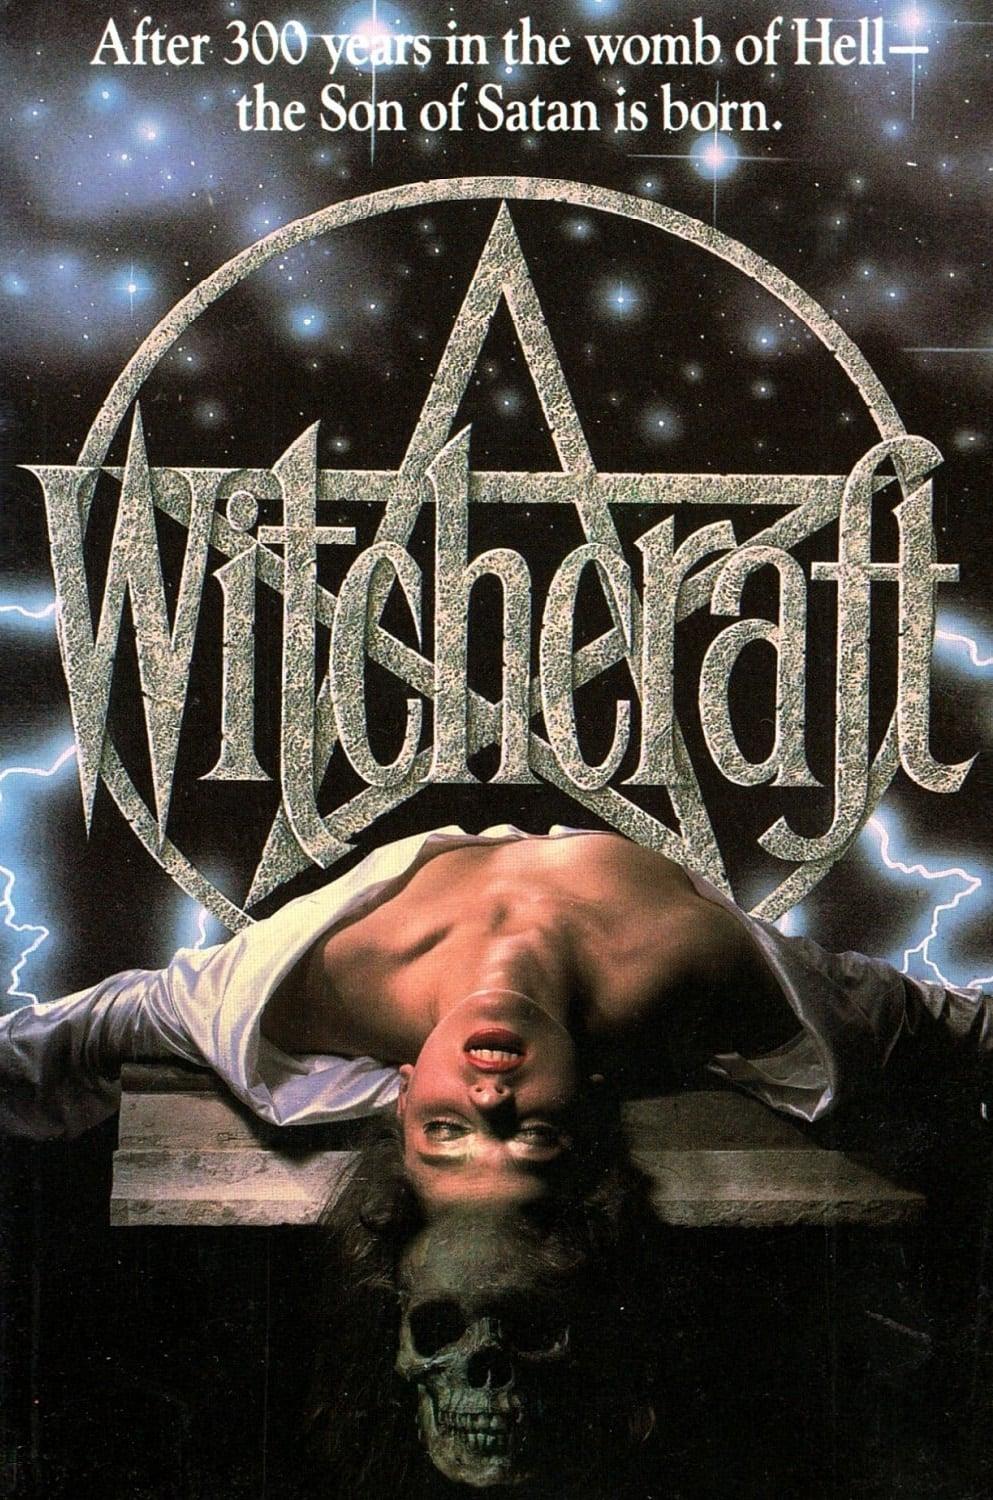 Witchcraft poster